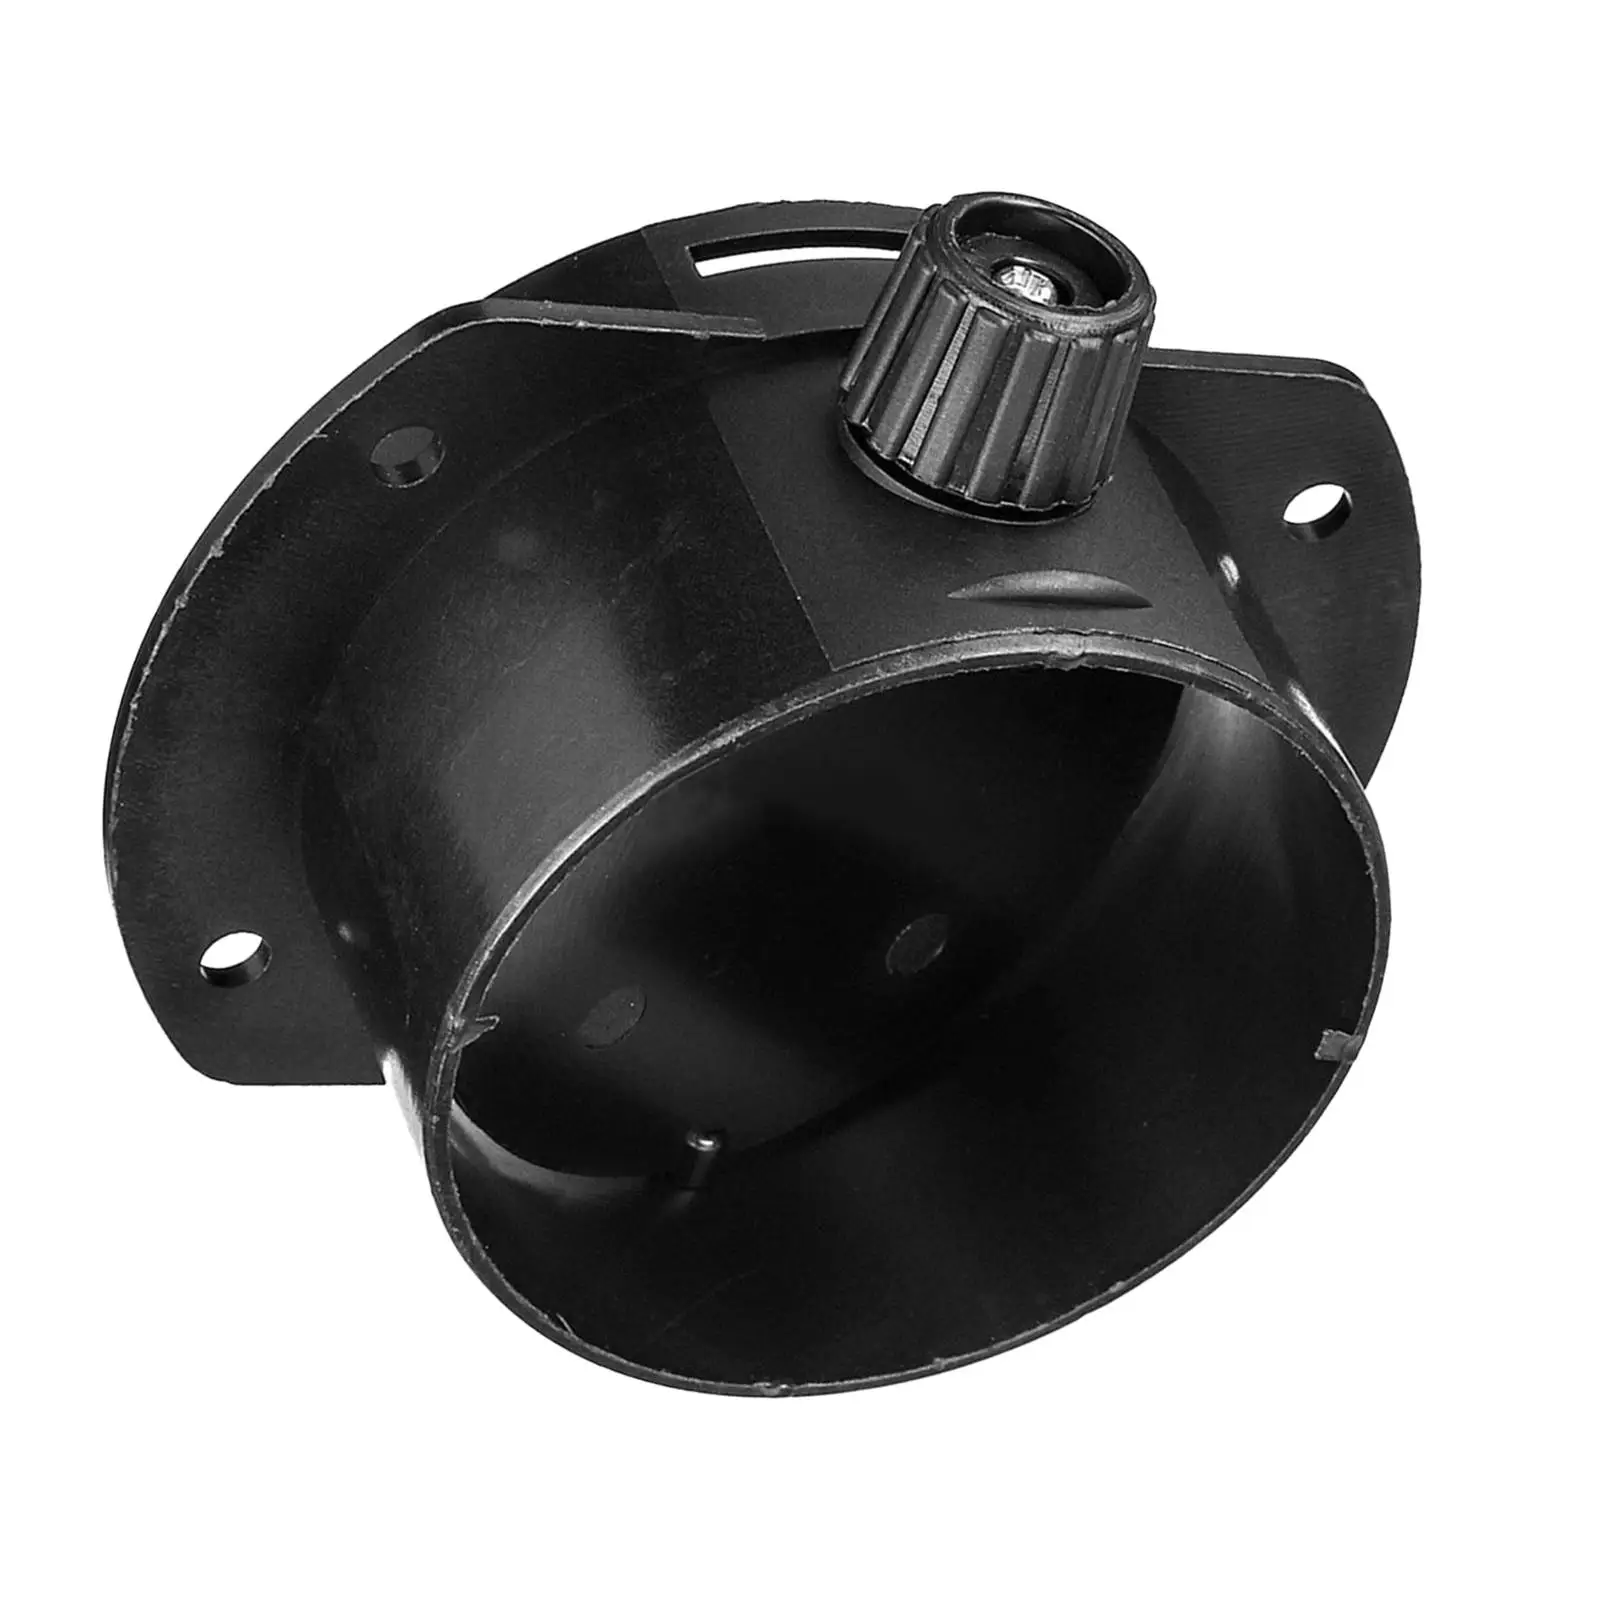 Closeable Open Regulating Valve 60mm for 2kW Parking Heater Vehicles RV